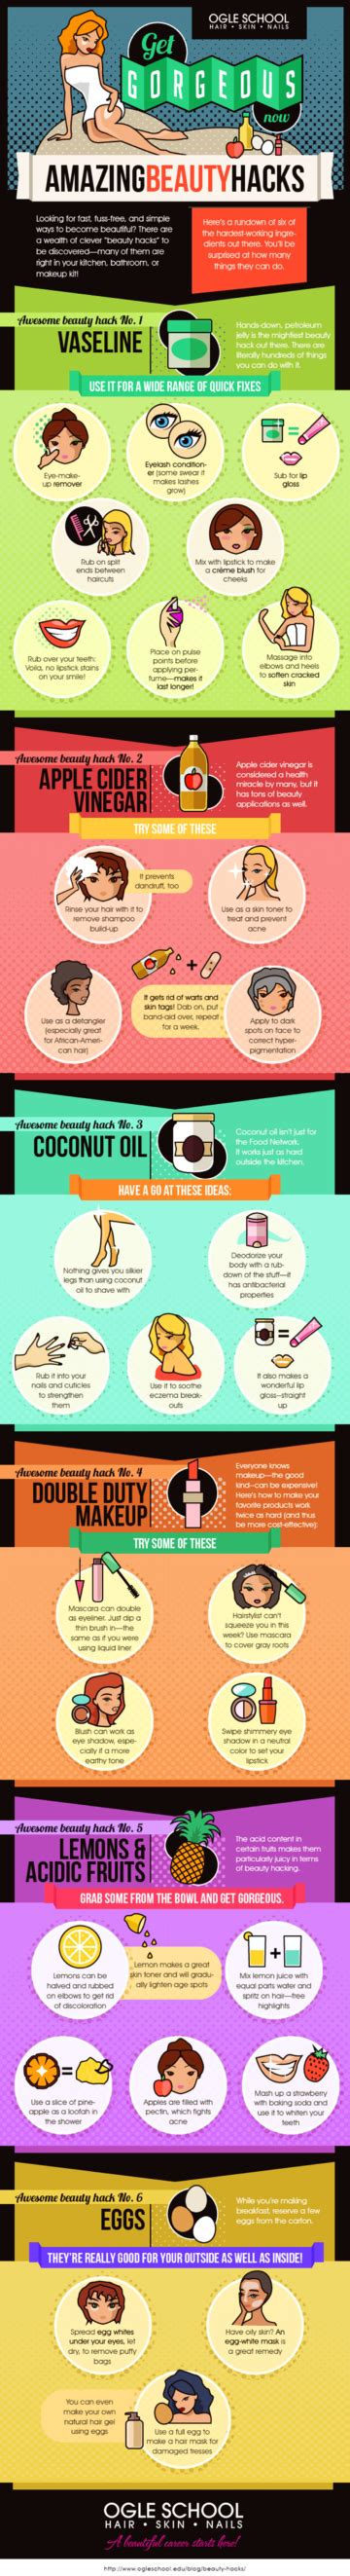 6 diy beauty hacks that every girl should know [infographic]